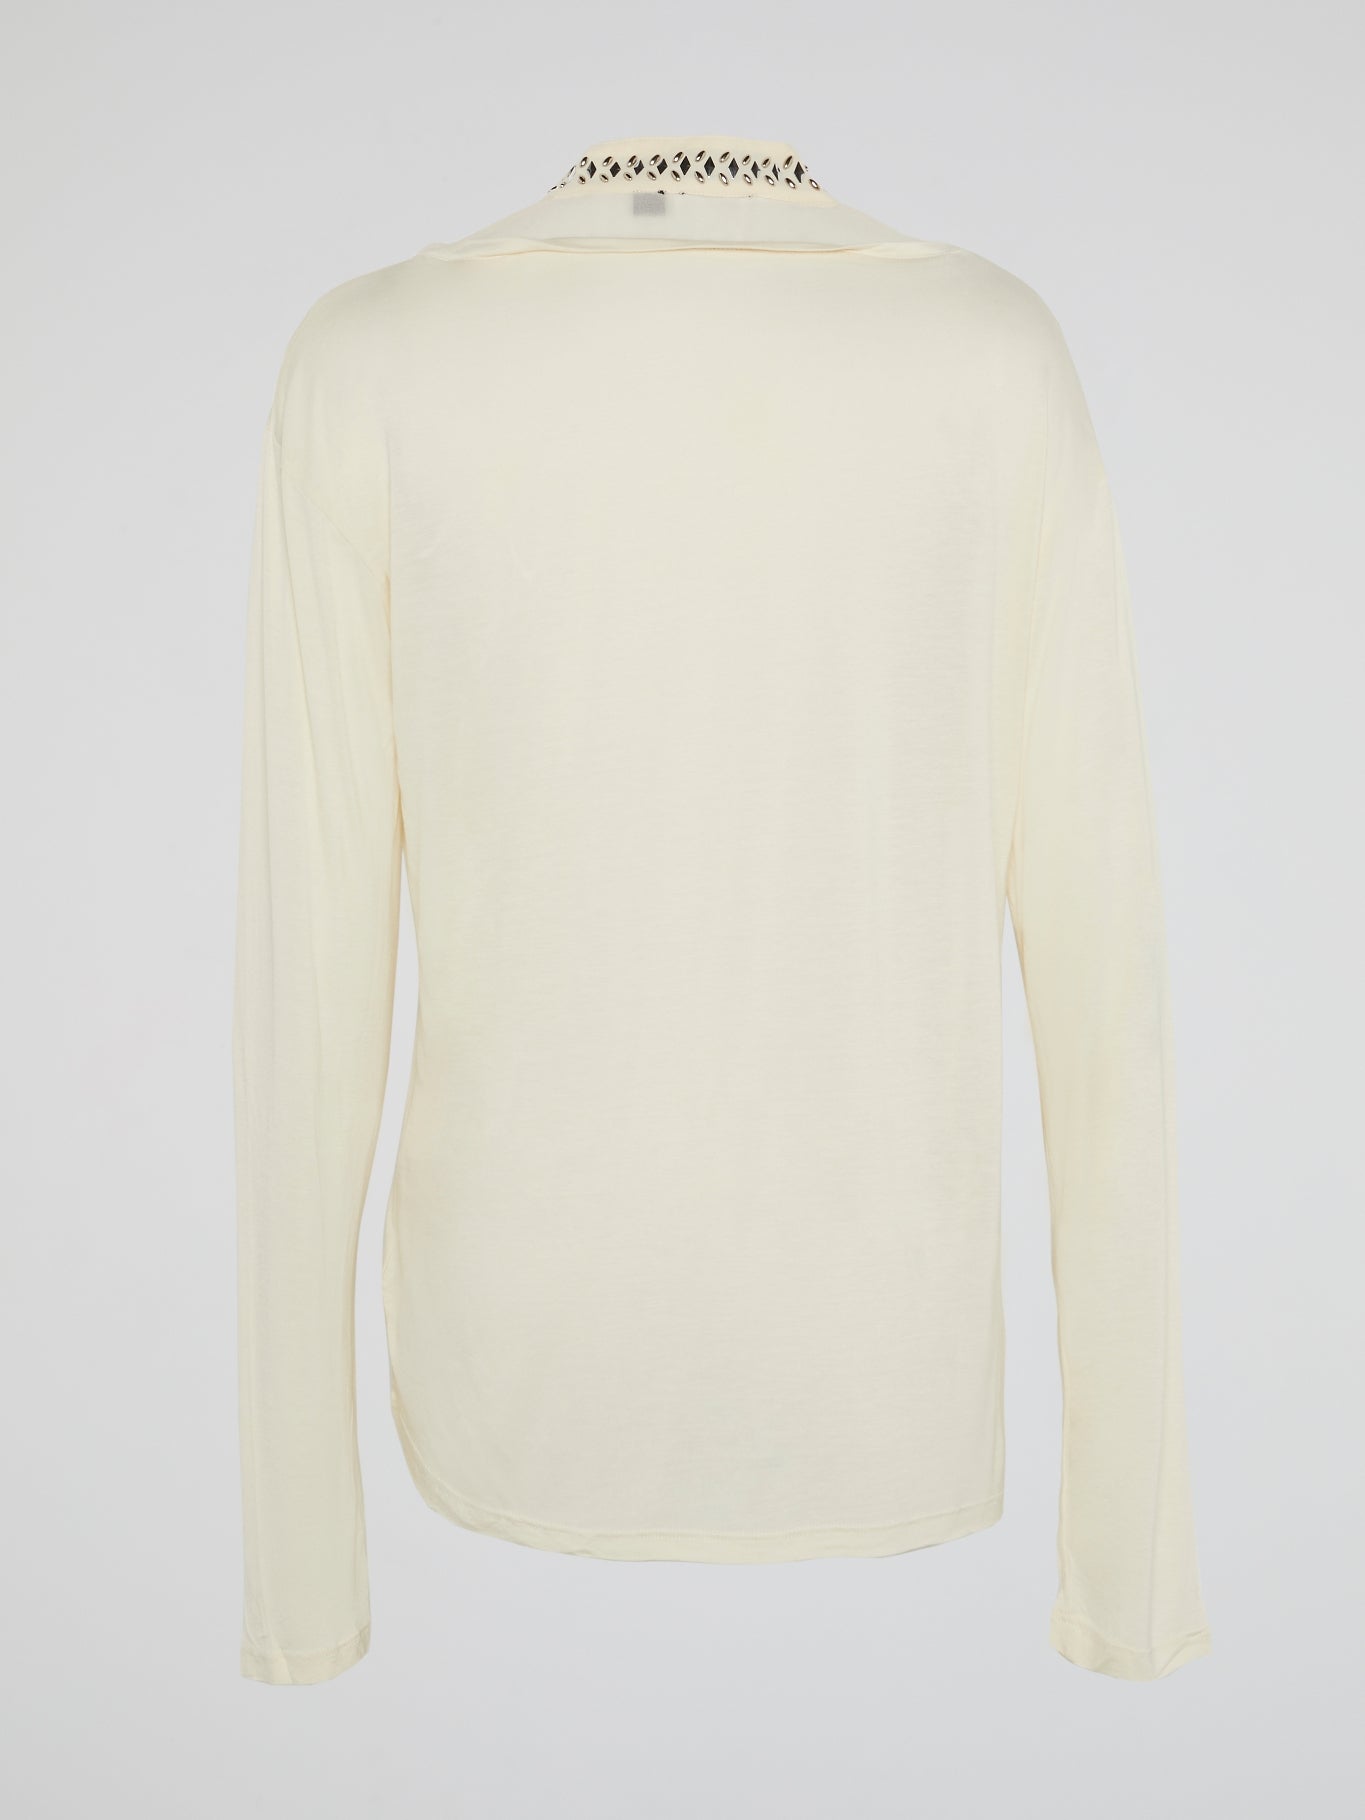 White Studded Collar Long Sleeve Top